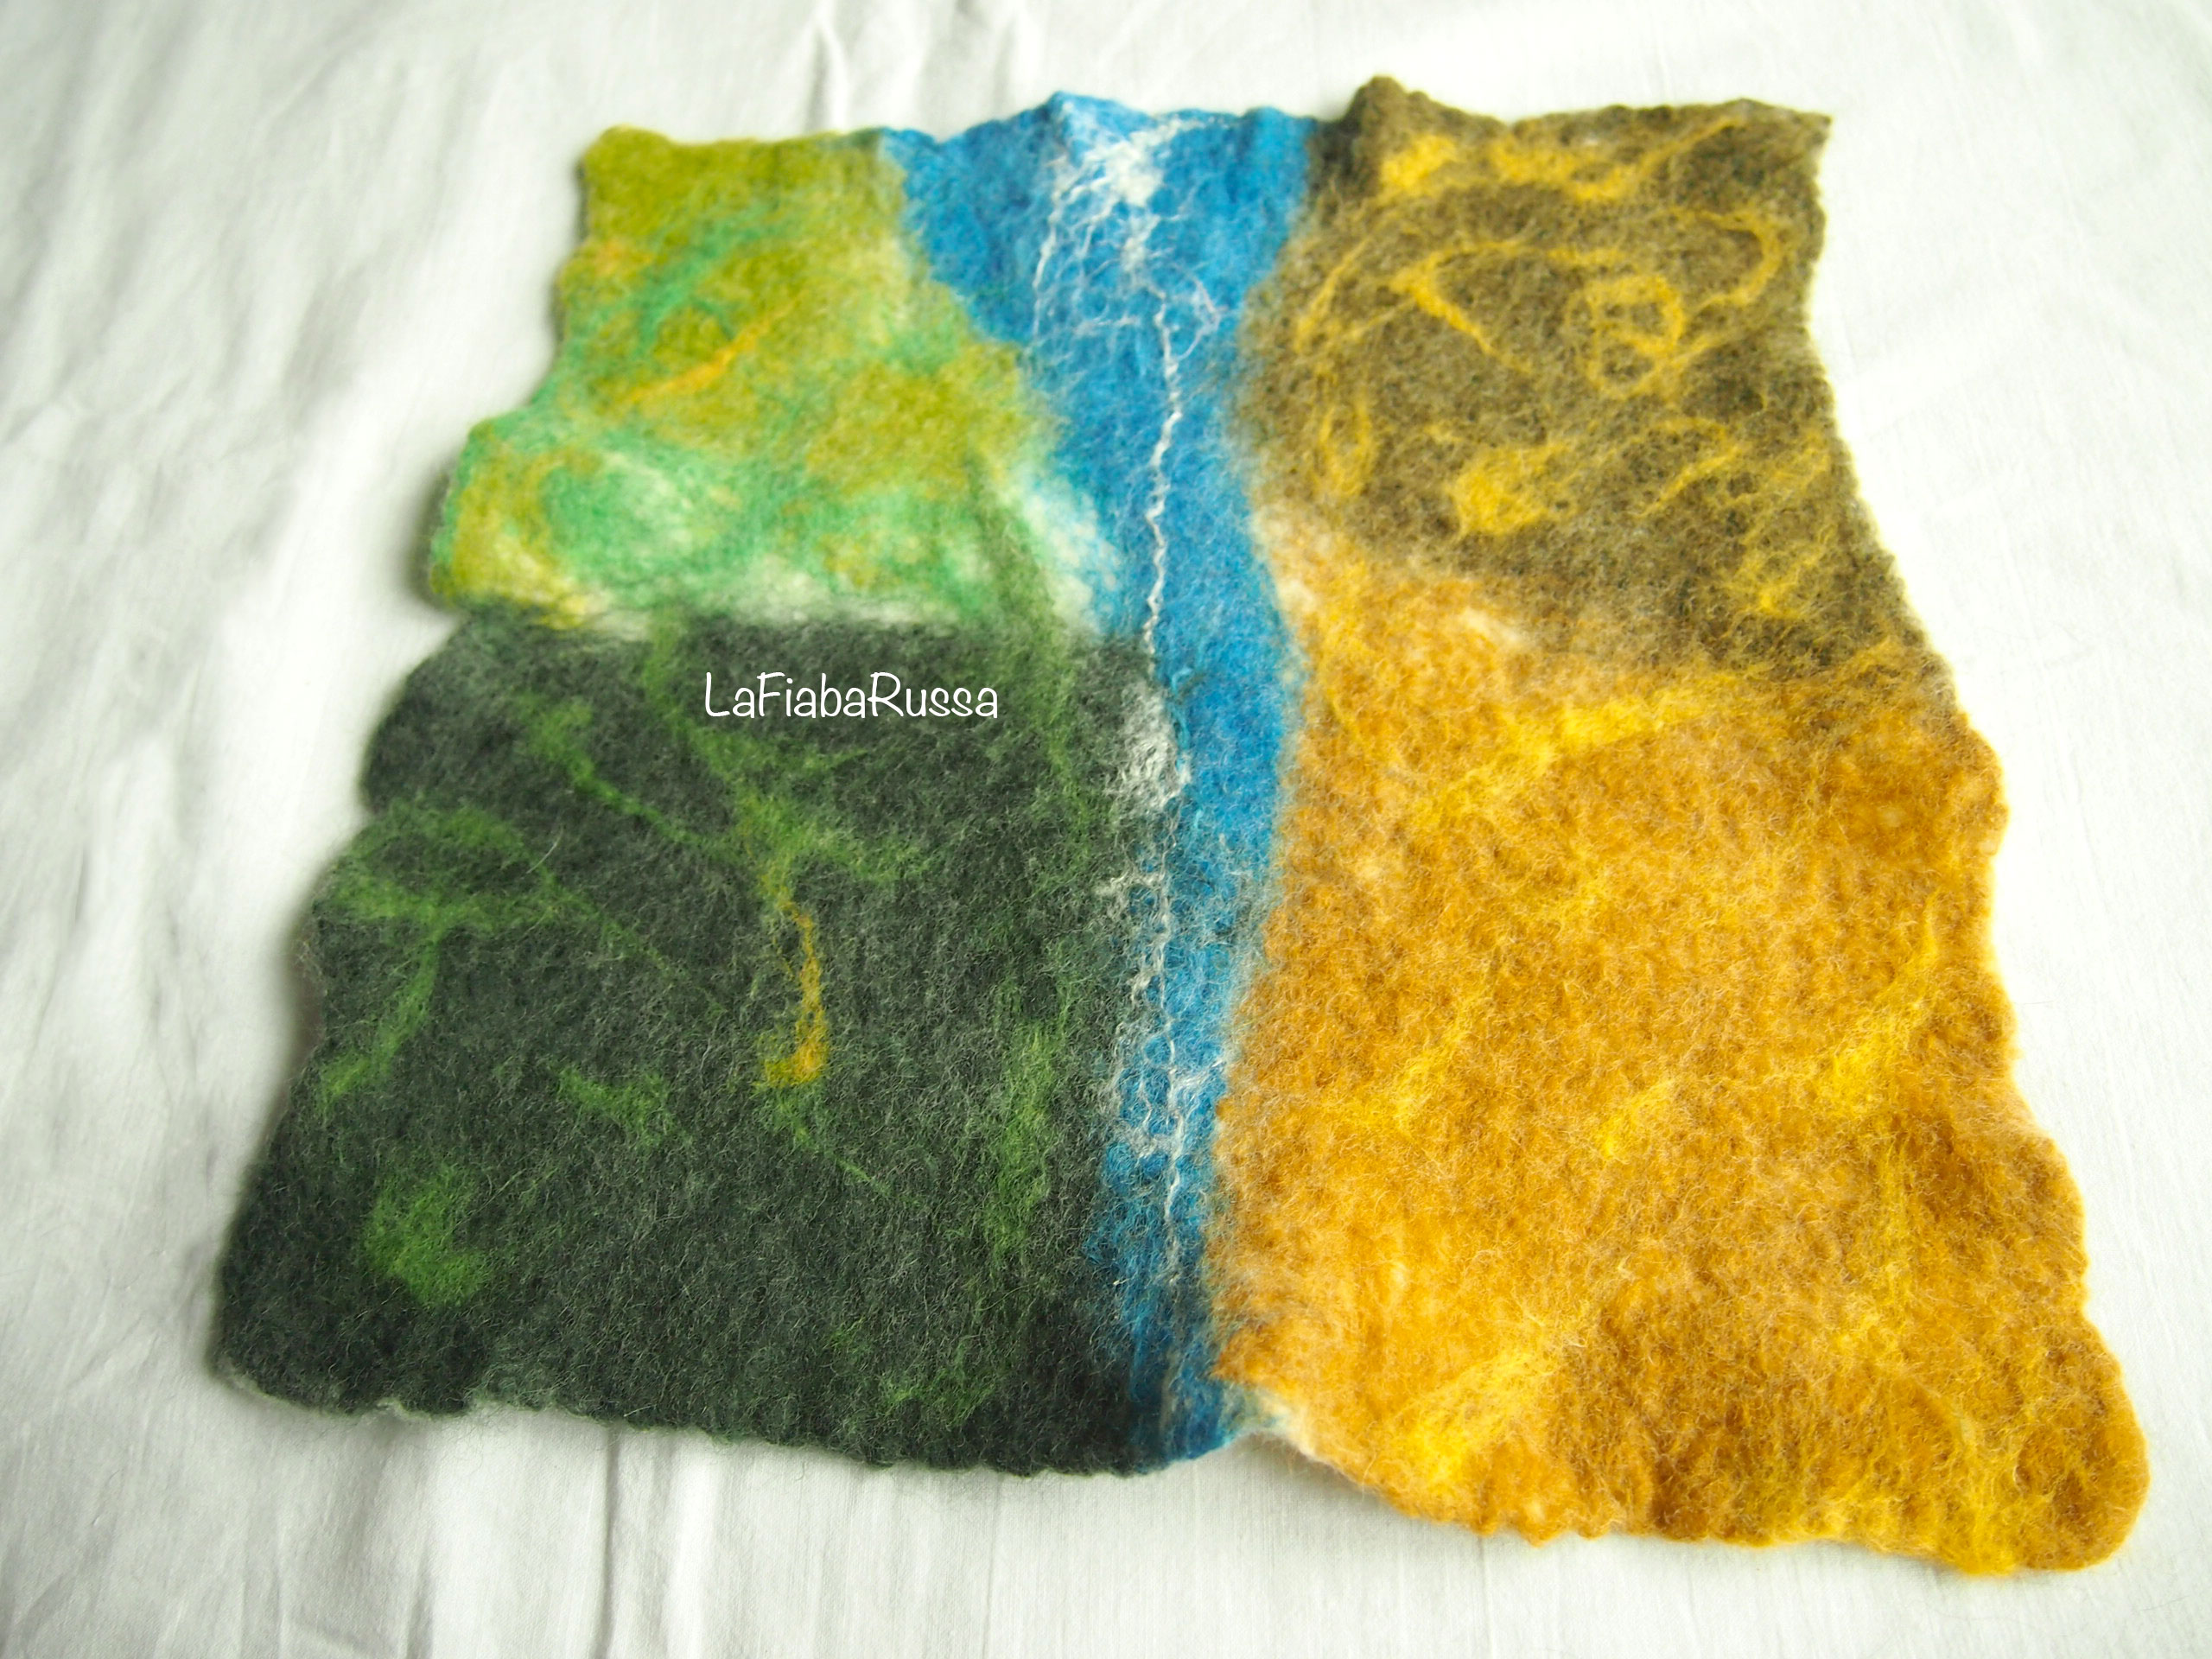 Wool felted playscape ready to ship